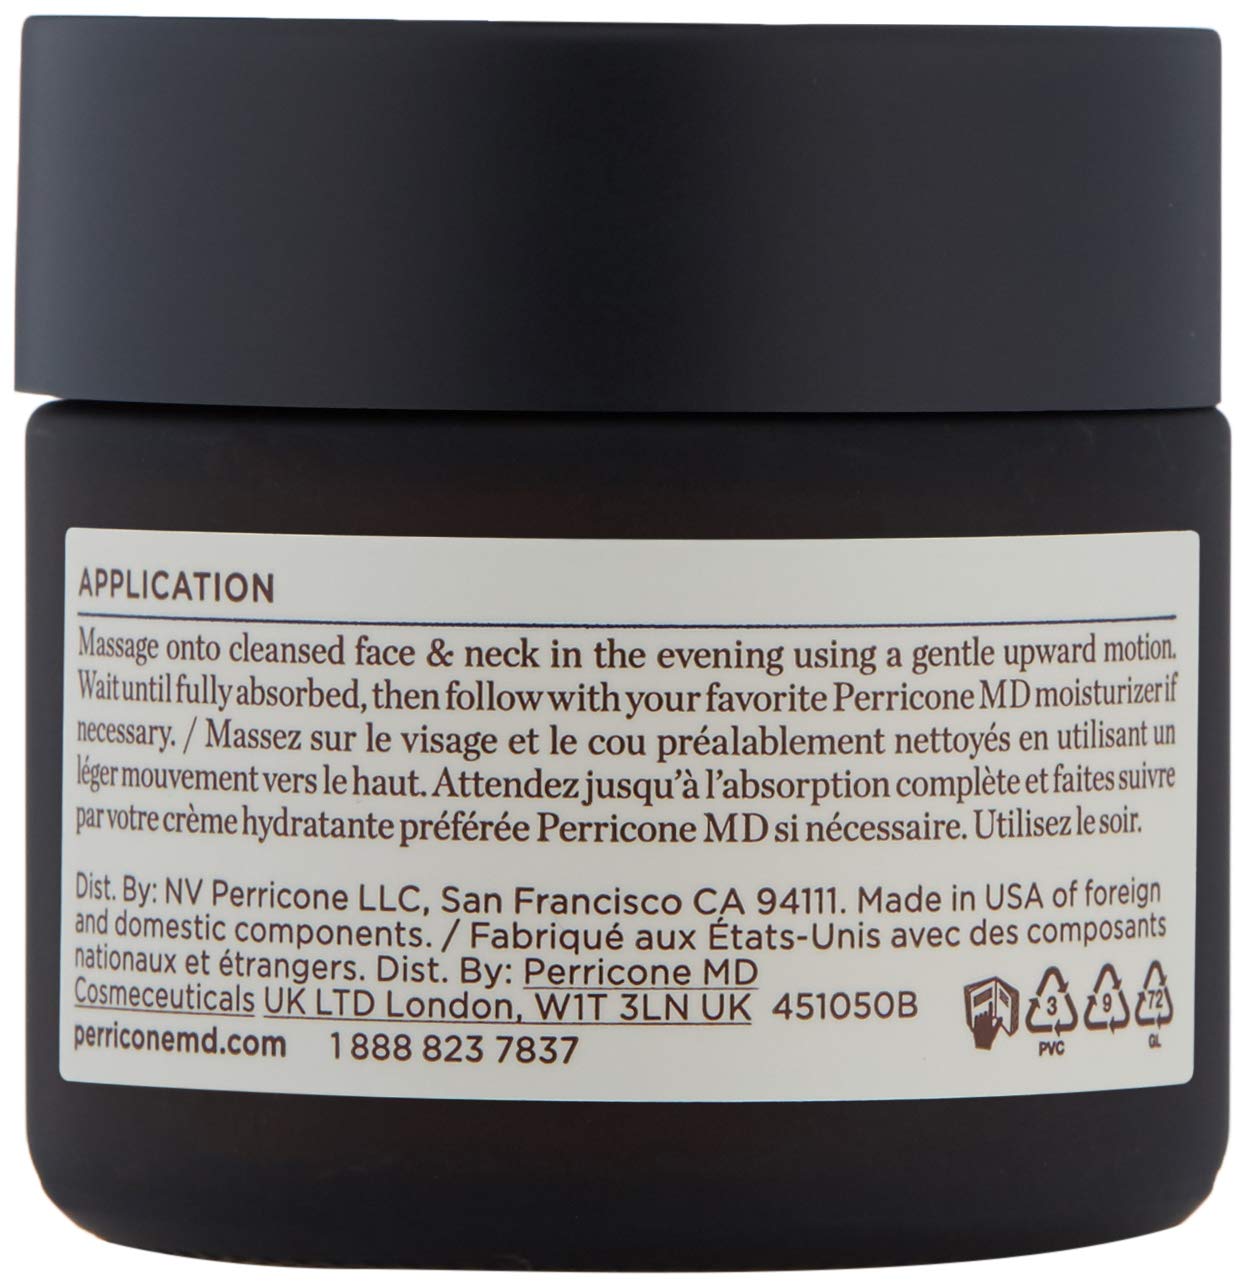 Perricone PERRICONE Multi-Action Overnight Intensive Firming Mask 59 ml